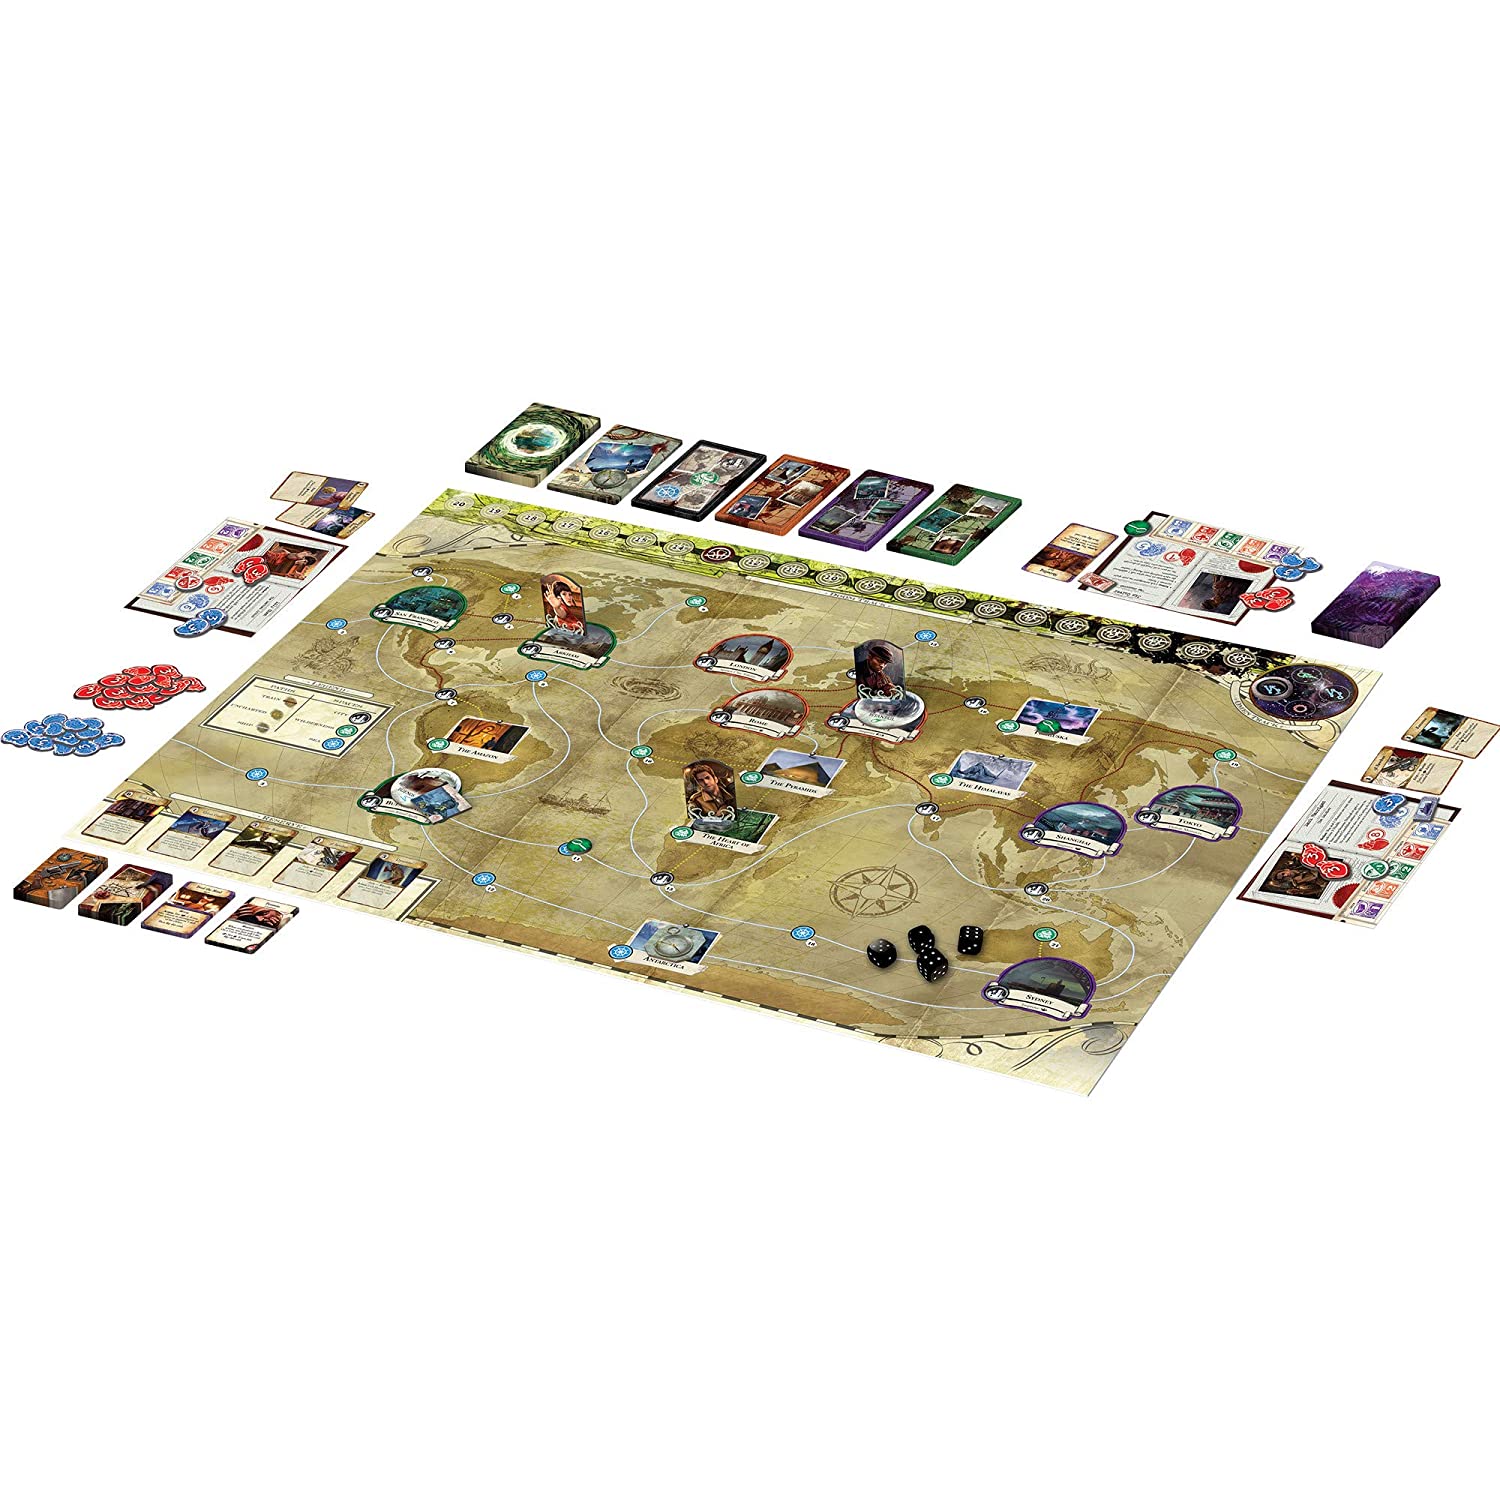 Eldritch Horror - A Global Tale of Mystery and Horror. Board Game Fantasy Flight Games. Sold by Board Hoarders